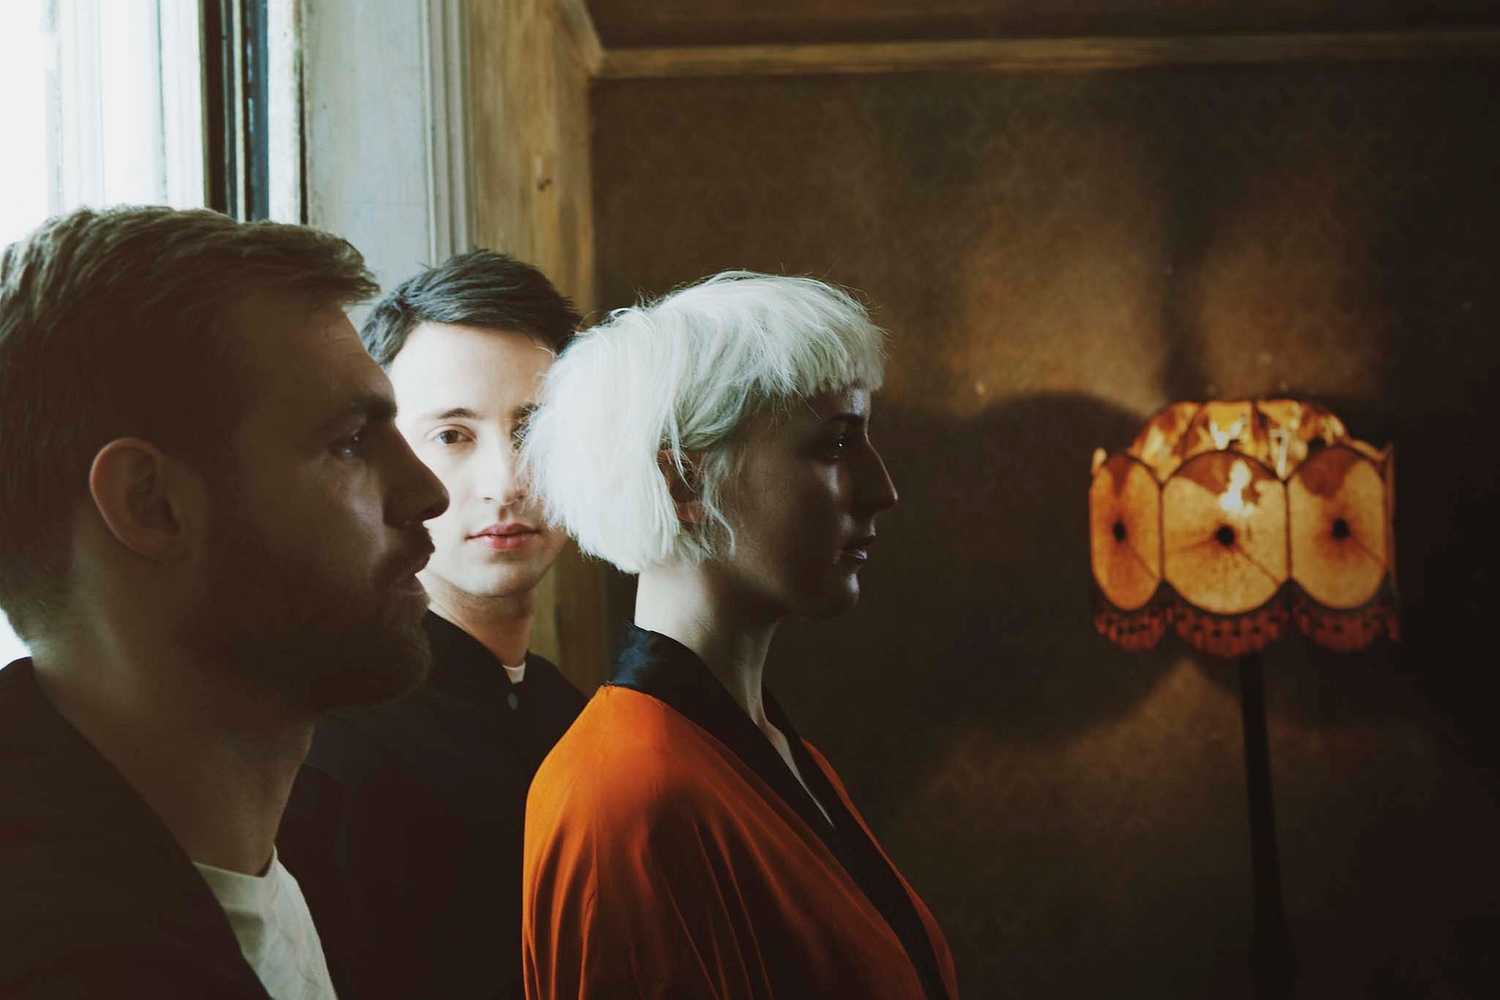 Vaults: “Right from day one, we were gonna make it hard for ourselves”